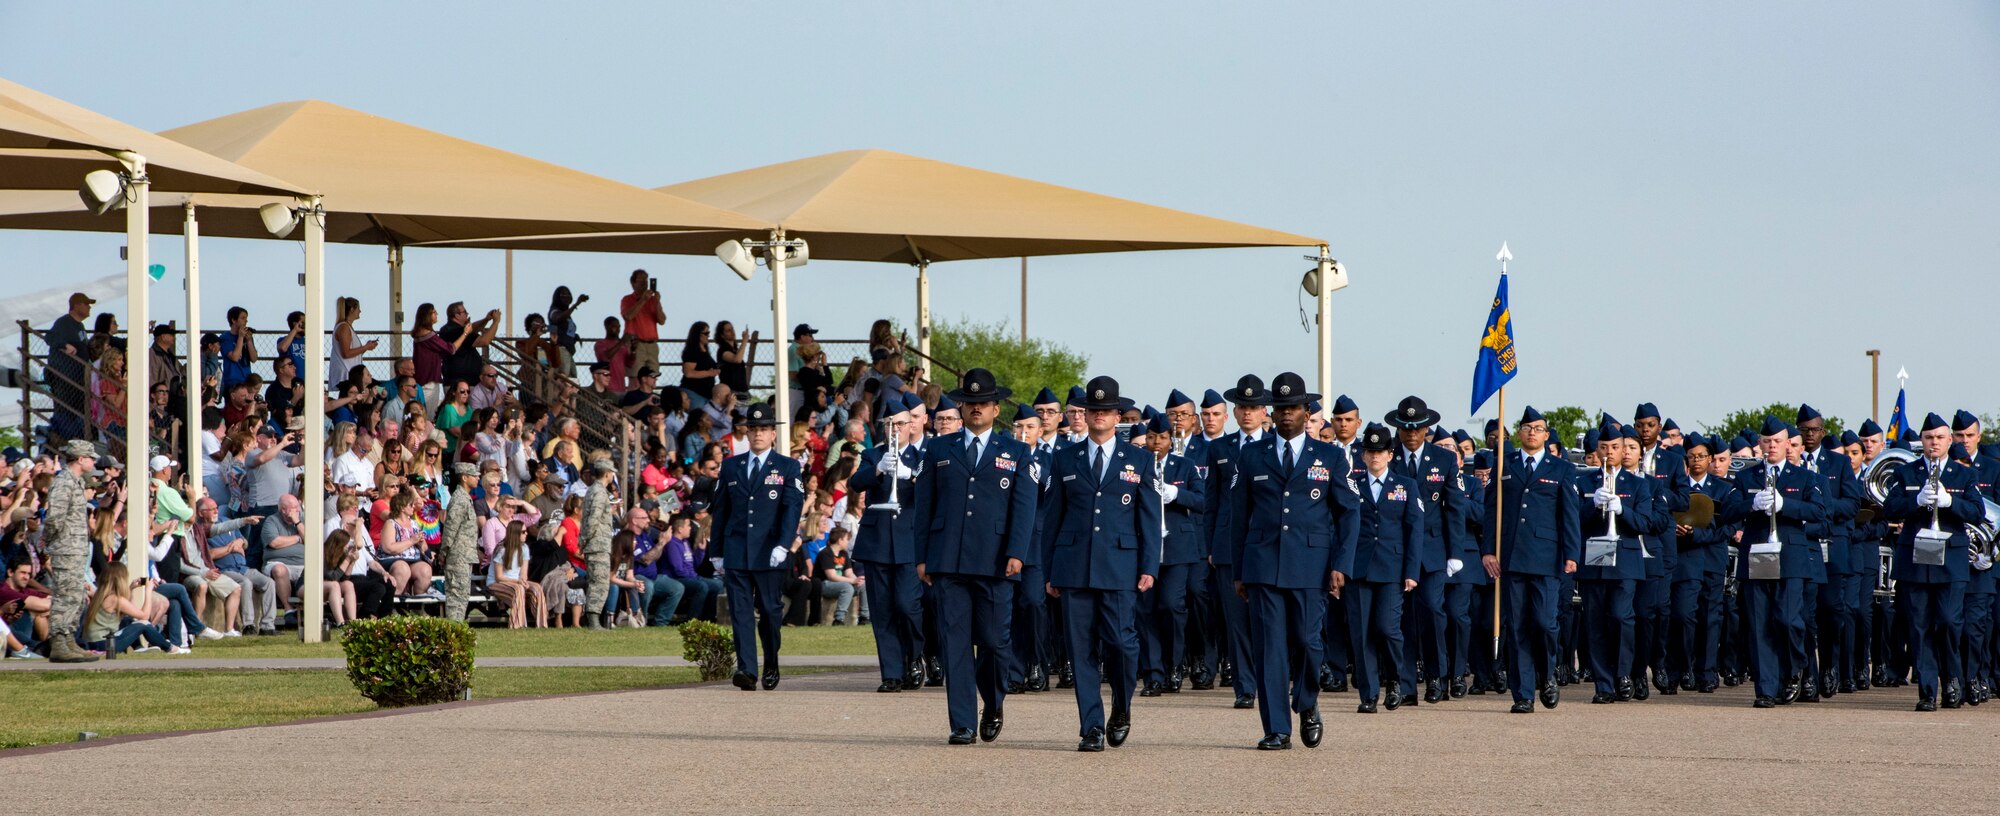 Airmen and military training instructors march in a basic military training graduation parade April 5, 2019, at Joint Base San Antonio-Lackland, Texas. The 37th Training Wing at JBSA-Lackland is the largest training wing in the United States Air Force. The wing encompasses six major training missions within its six groups.